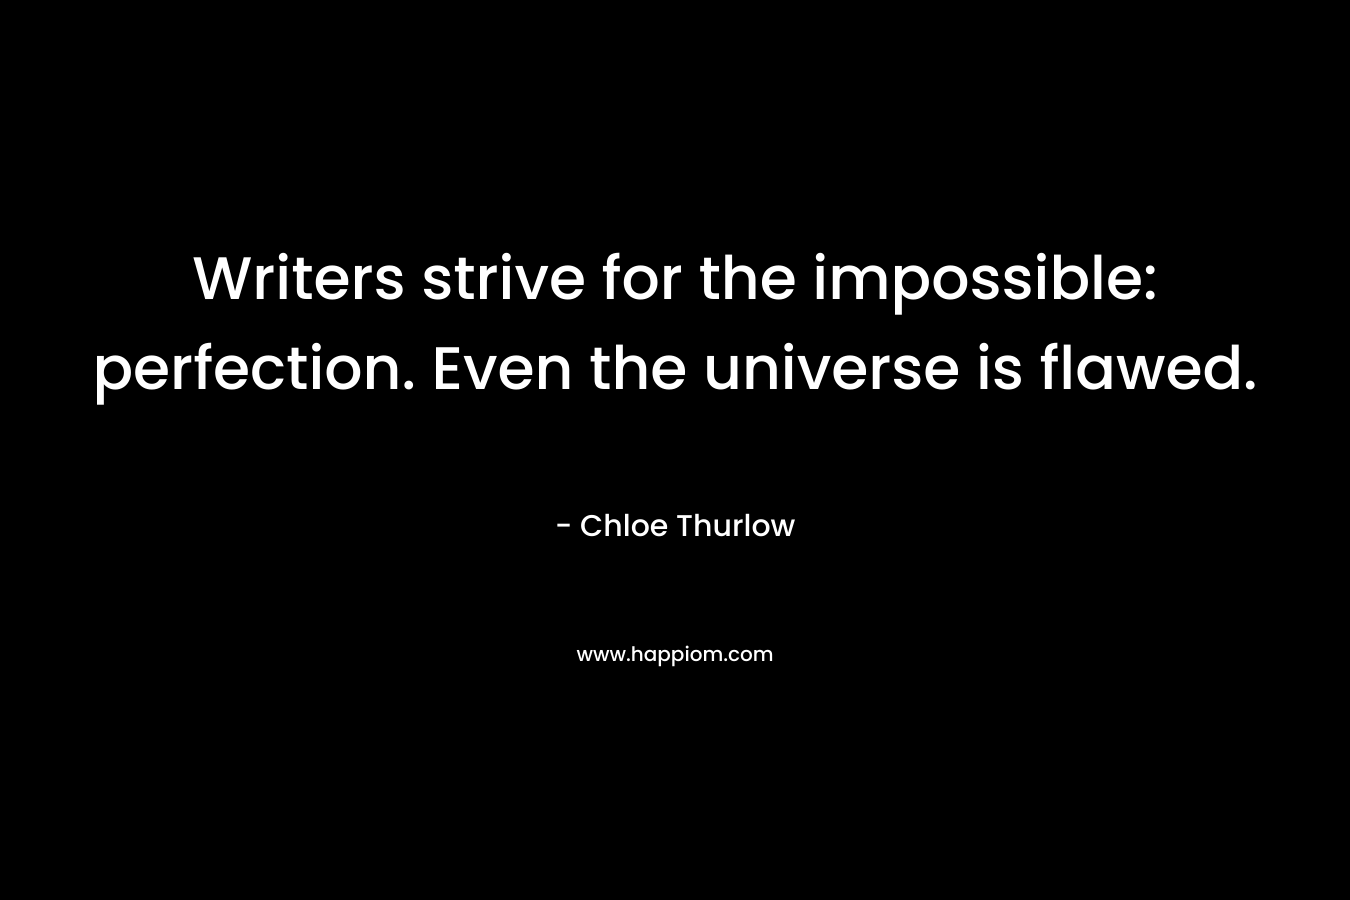 Writers strive for the impossible: perfection. Even the universe is flawed.